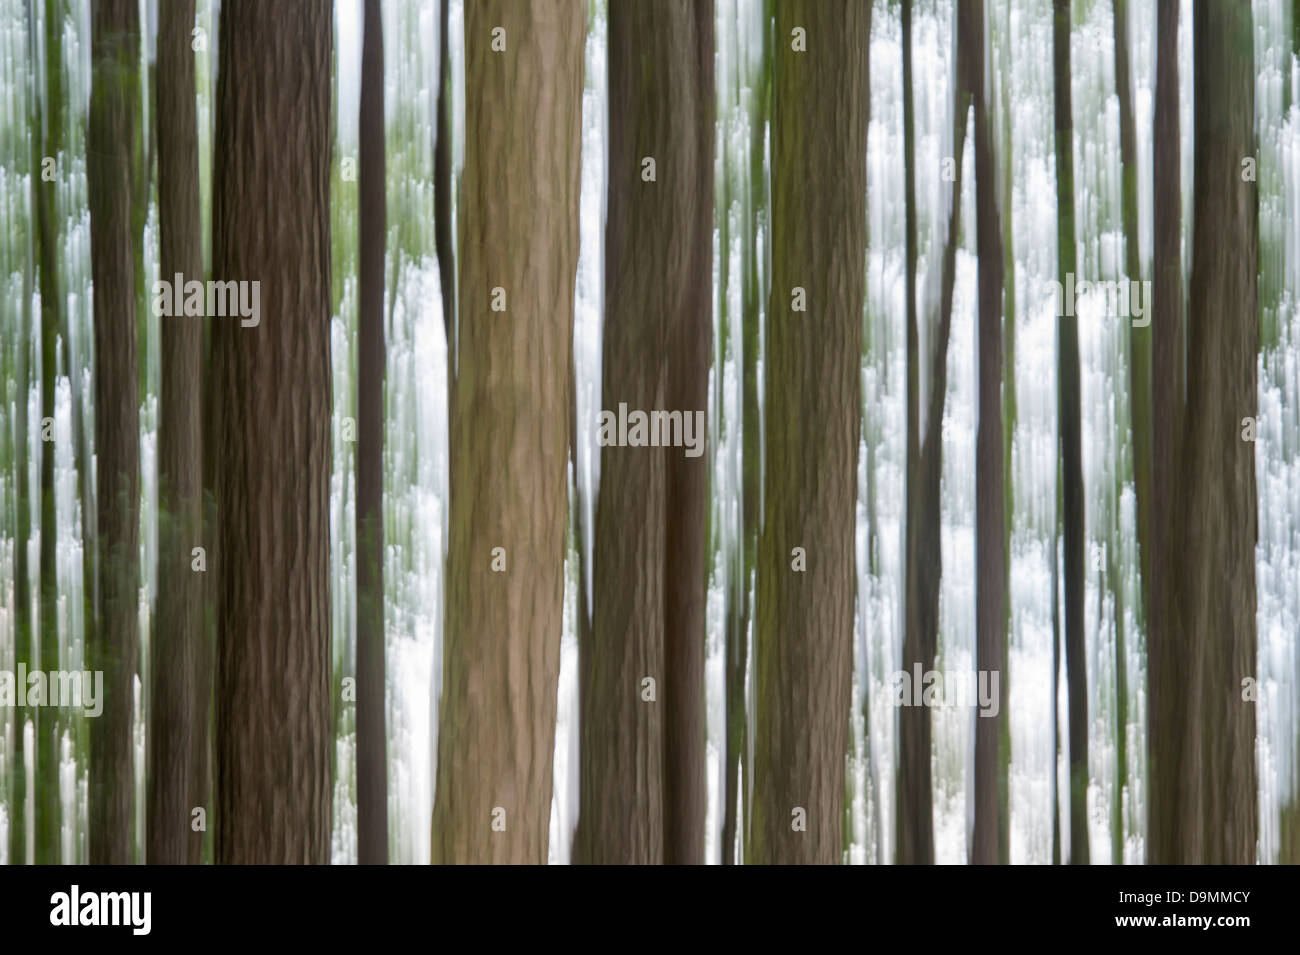 tree, trees, abstract, wood, motion, blur Stock Photo